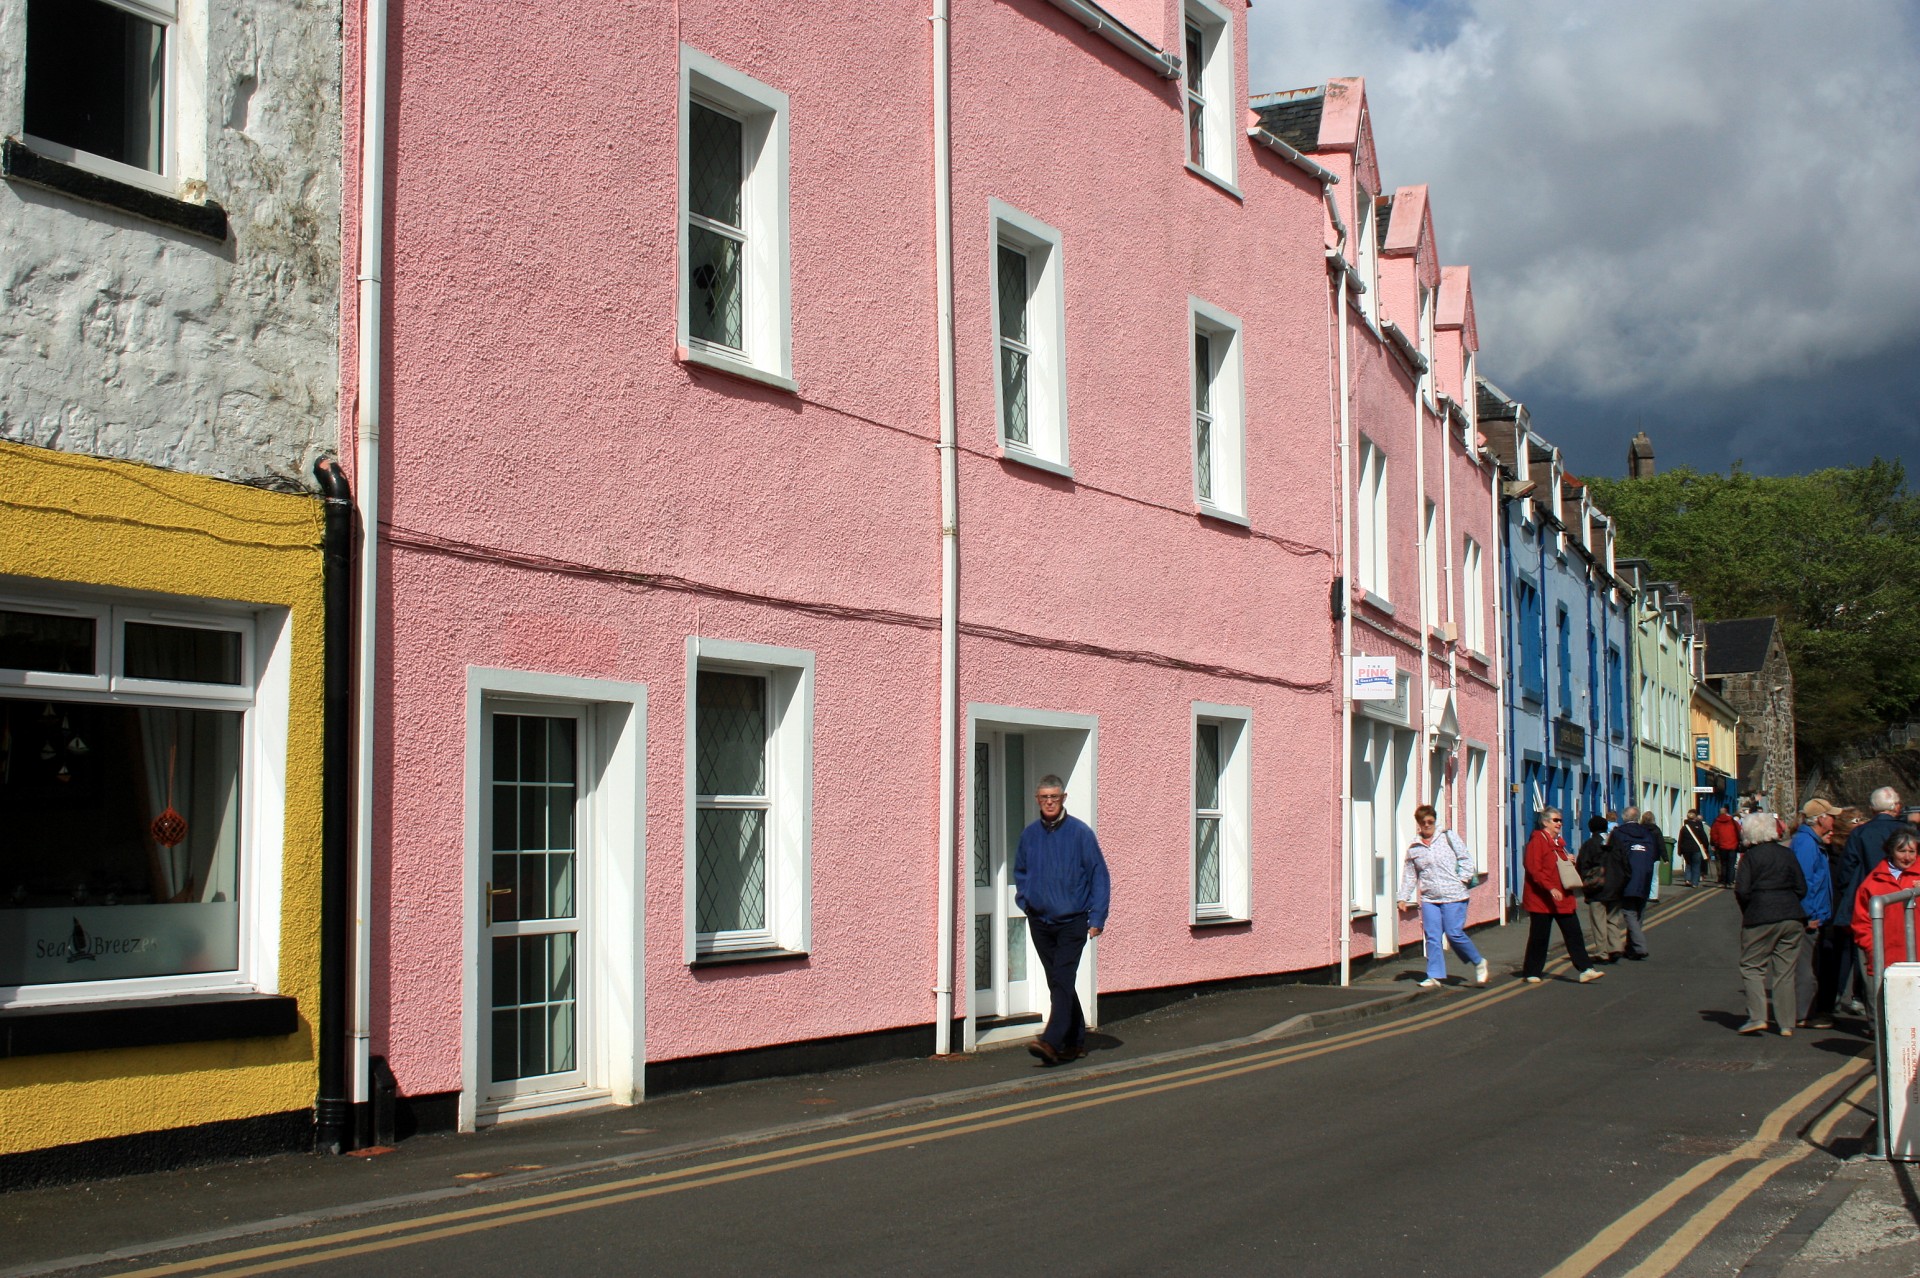 Houses,pink,scotland,road,people - free image from needpix.com